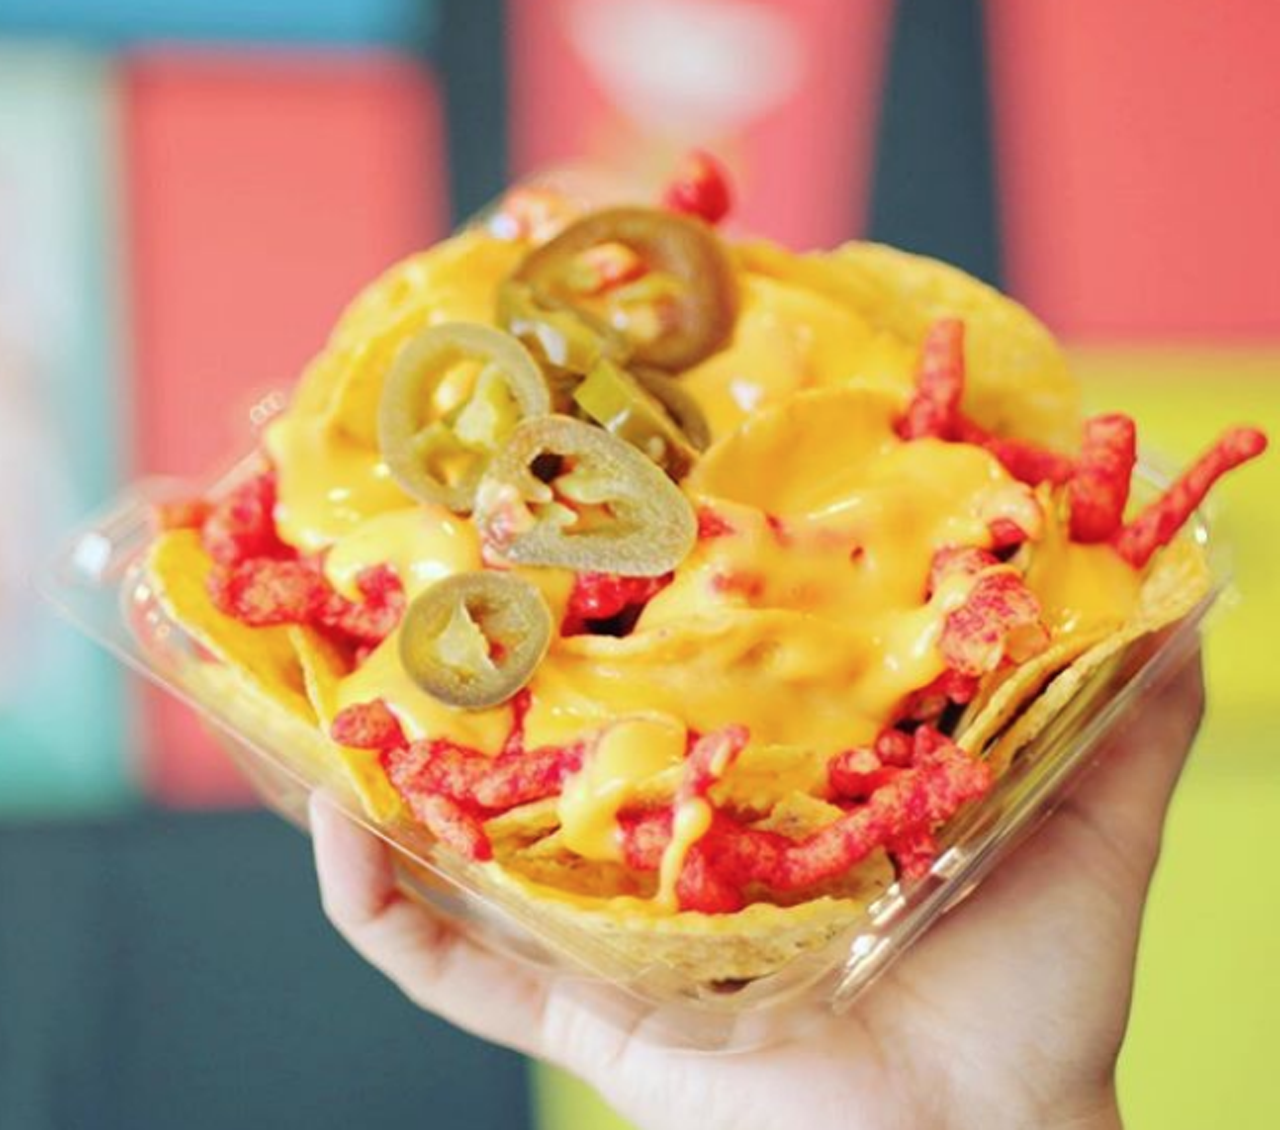 Hot Cheetos and cheese
Whether you do this with your bestie or bae, everyone will be gagged over this duo costume. Feel free to be particular and differentiate between the limon chips if you’re really about it.
Photo via Instagram / slusheeland